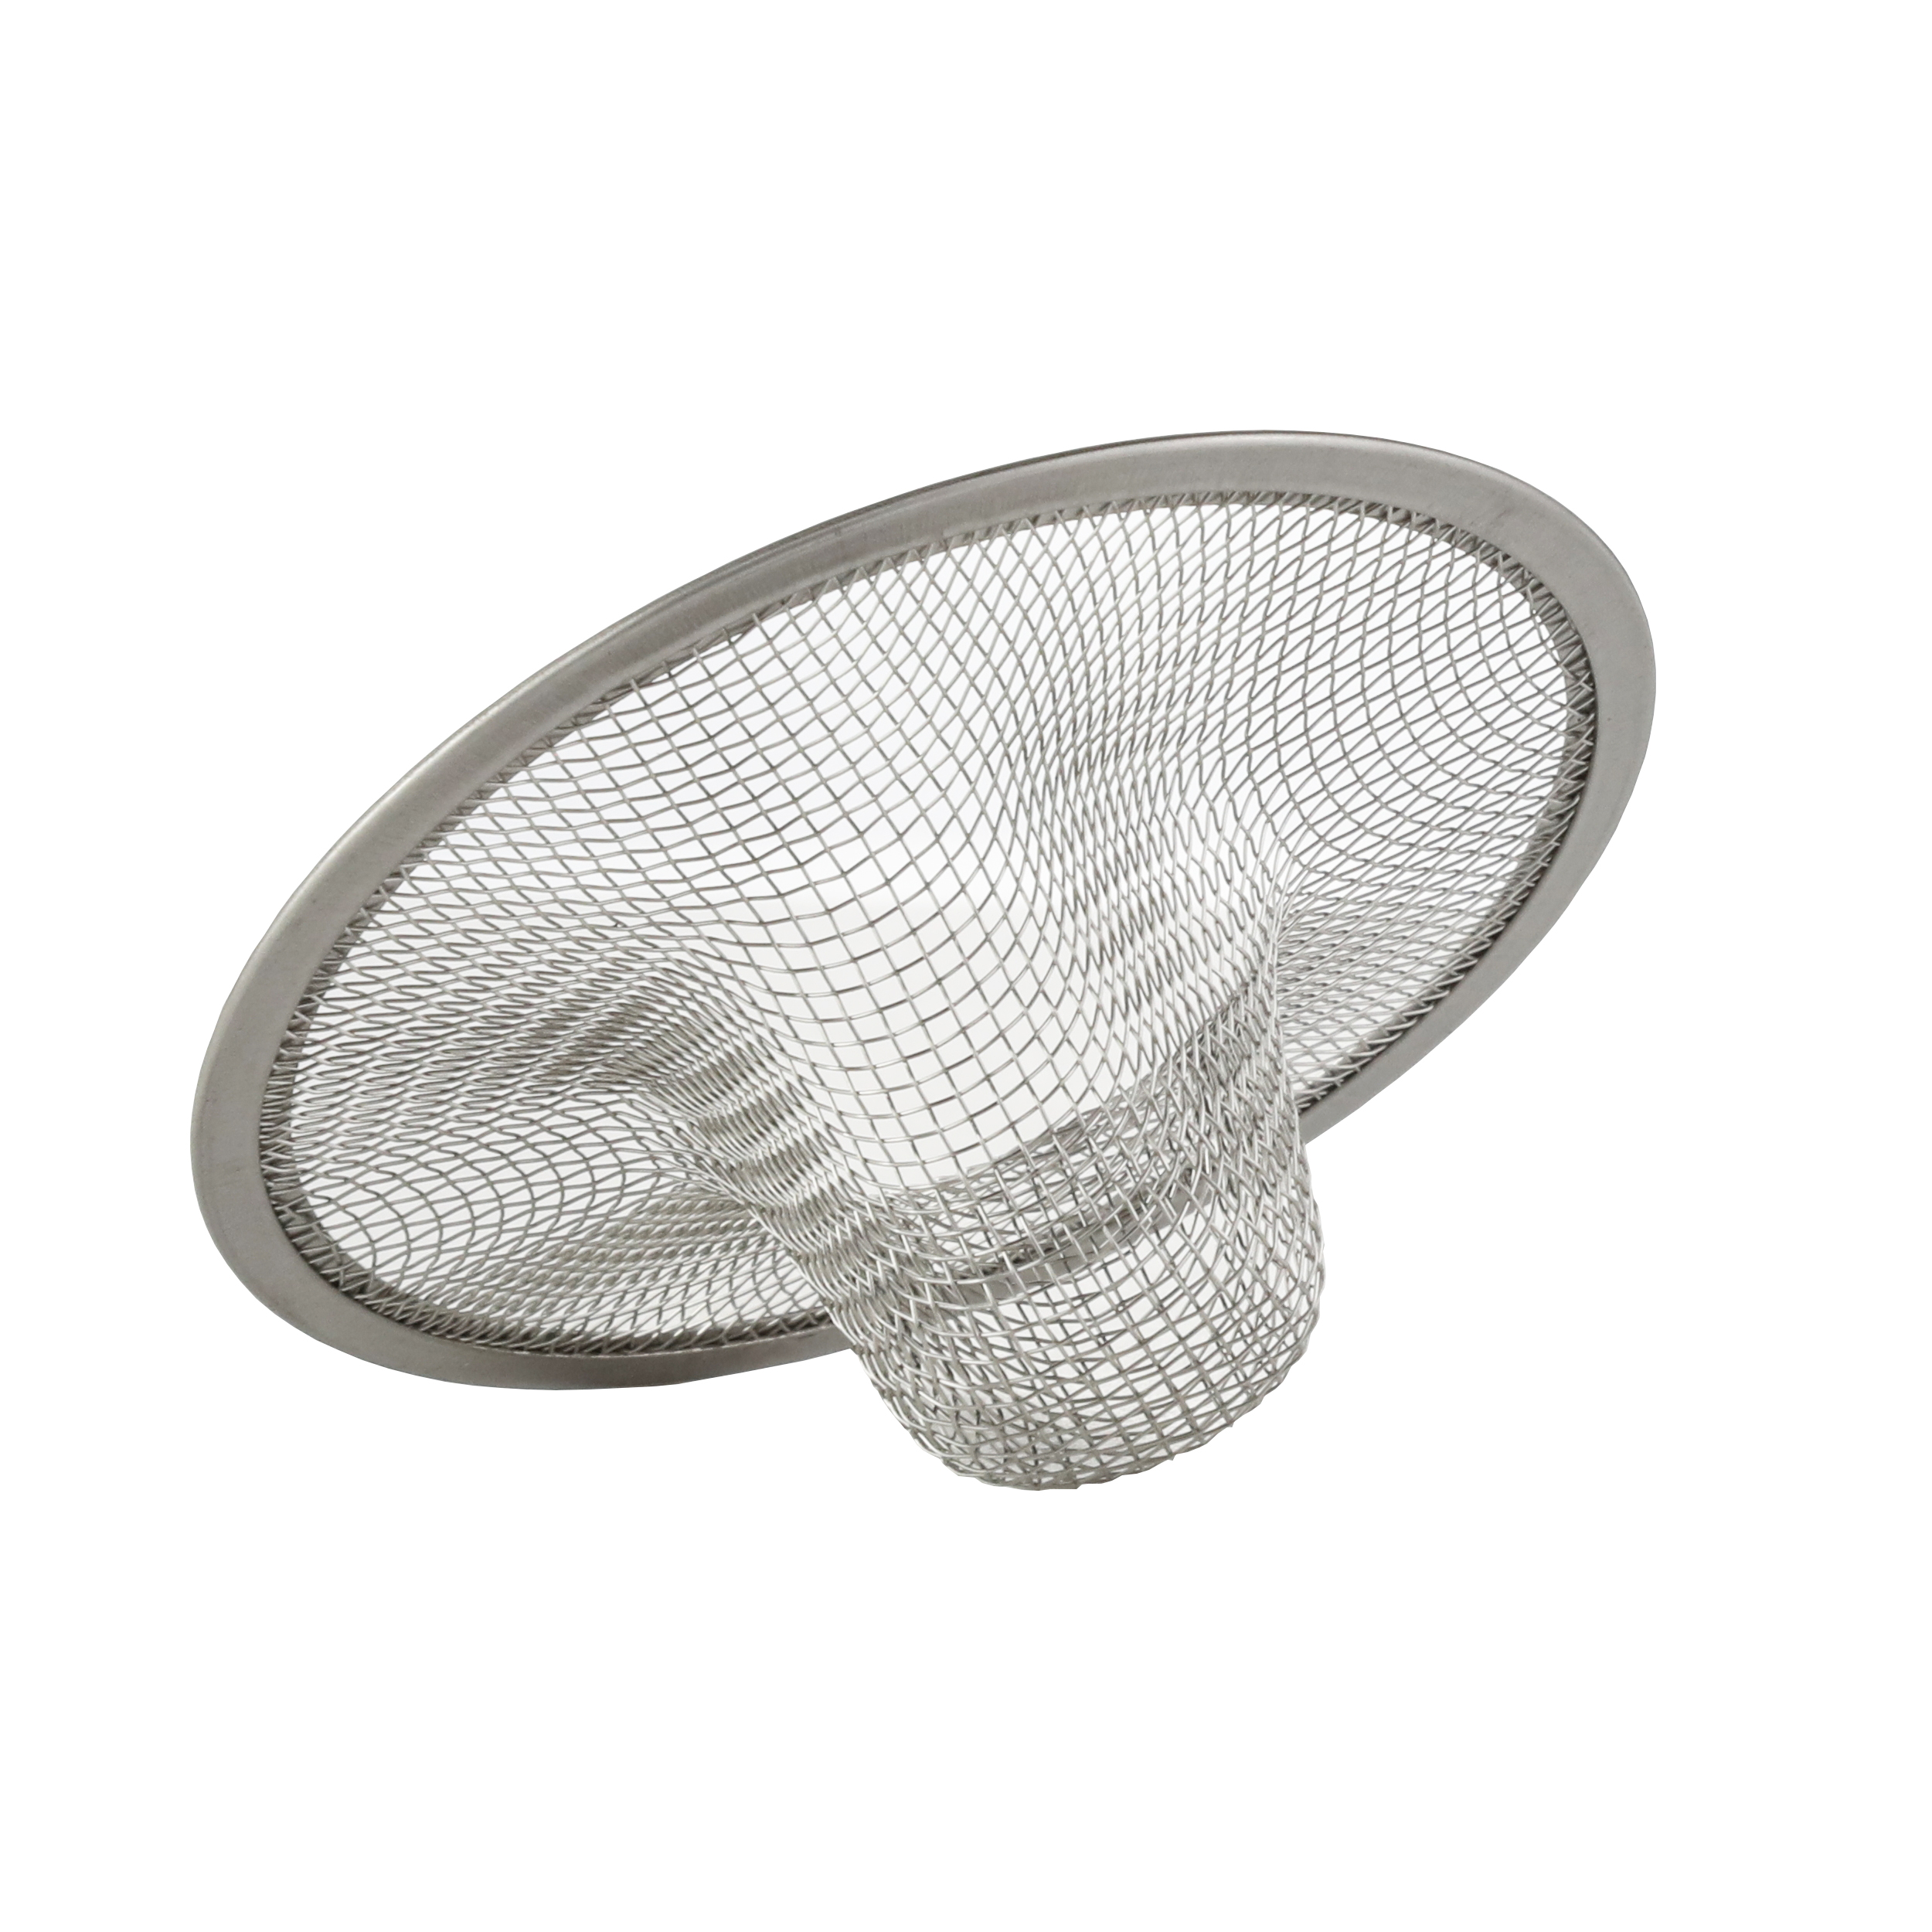 DANCO 2-7/8 in. Bath Grid Strainer with Screw in Chrome 88926